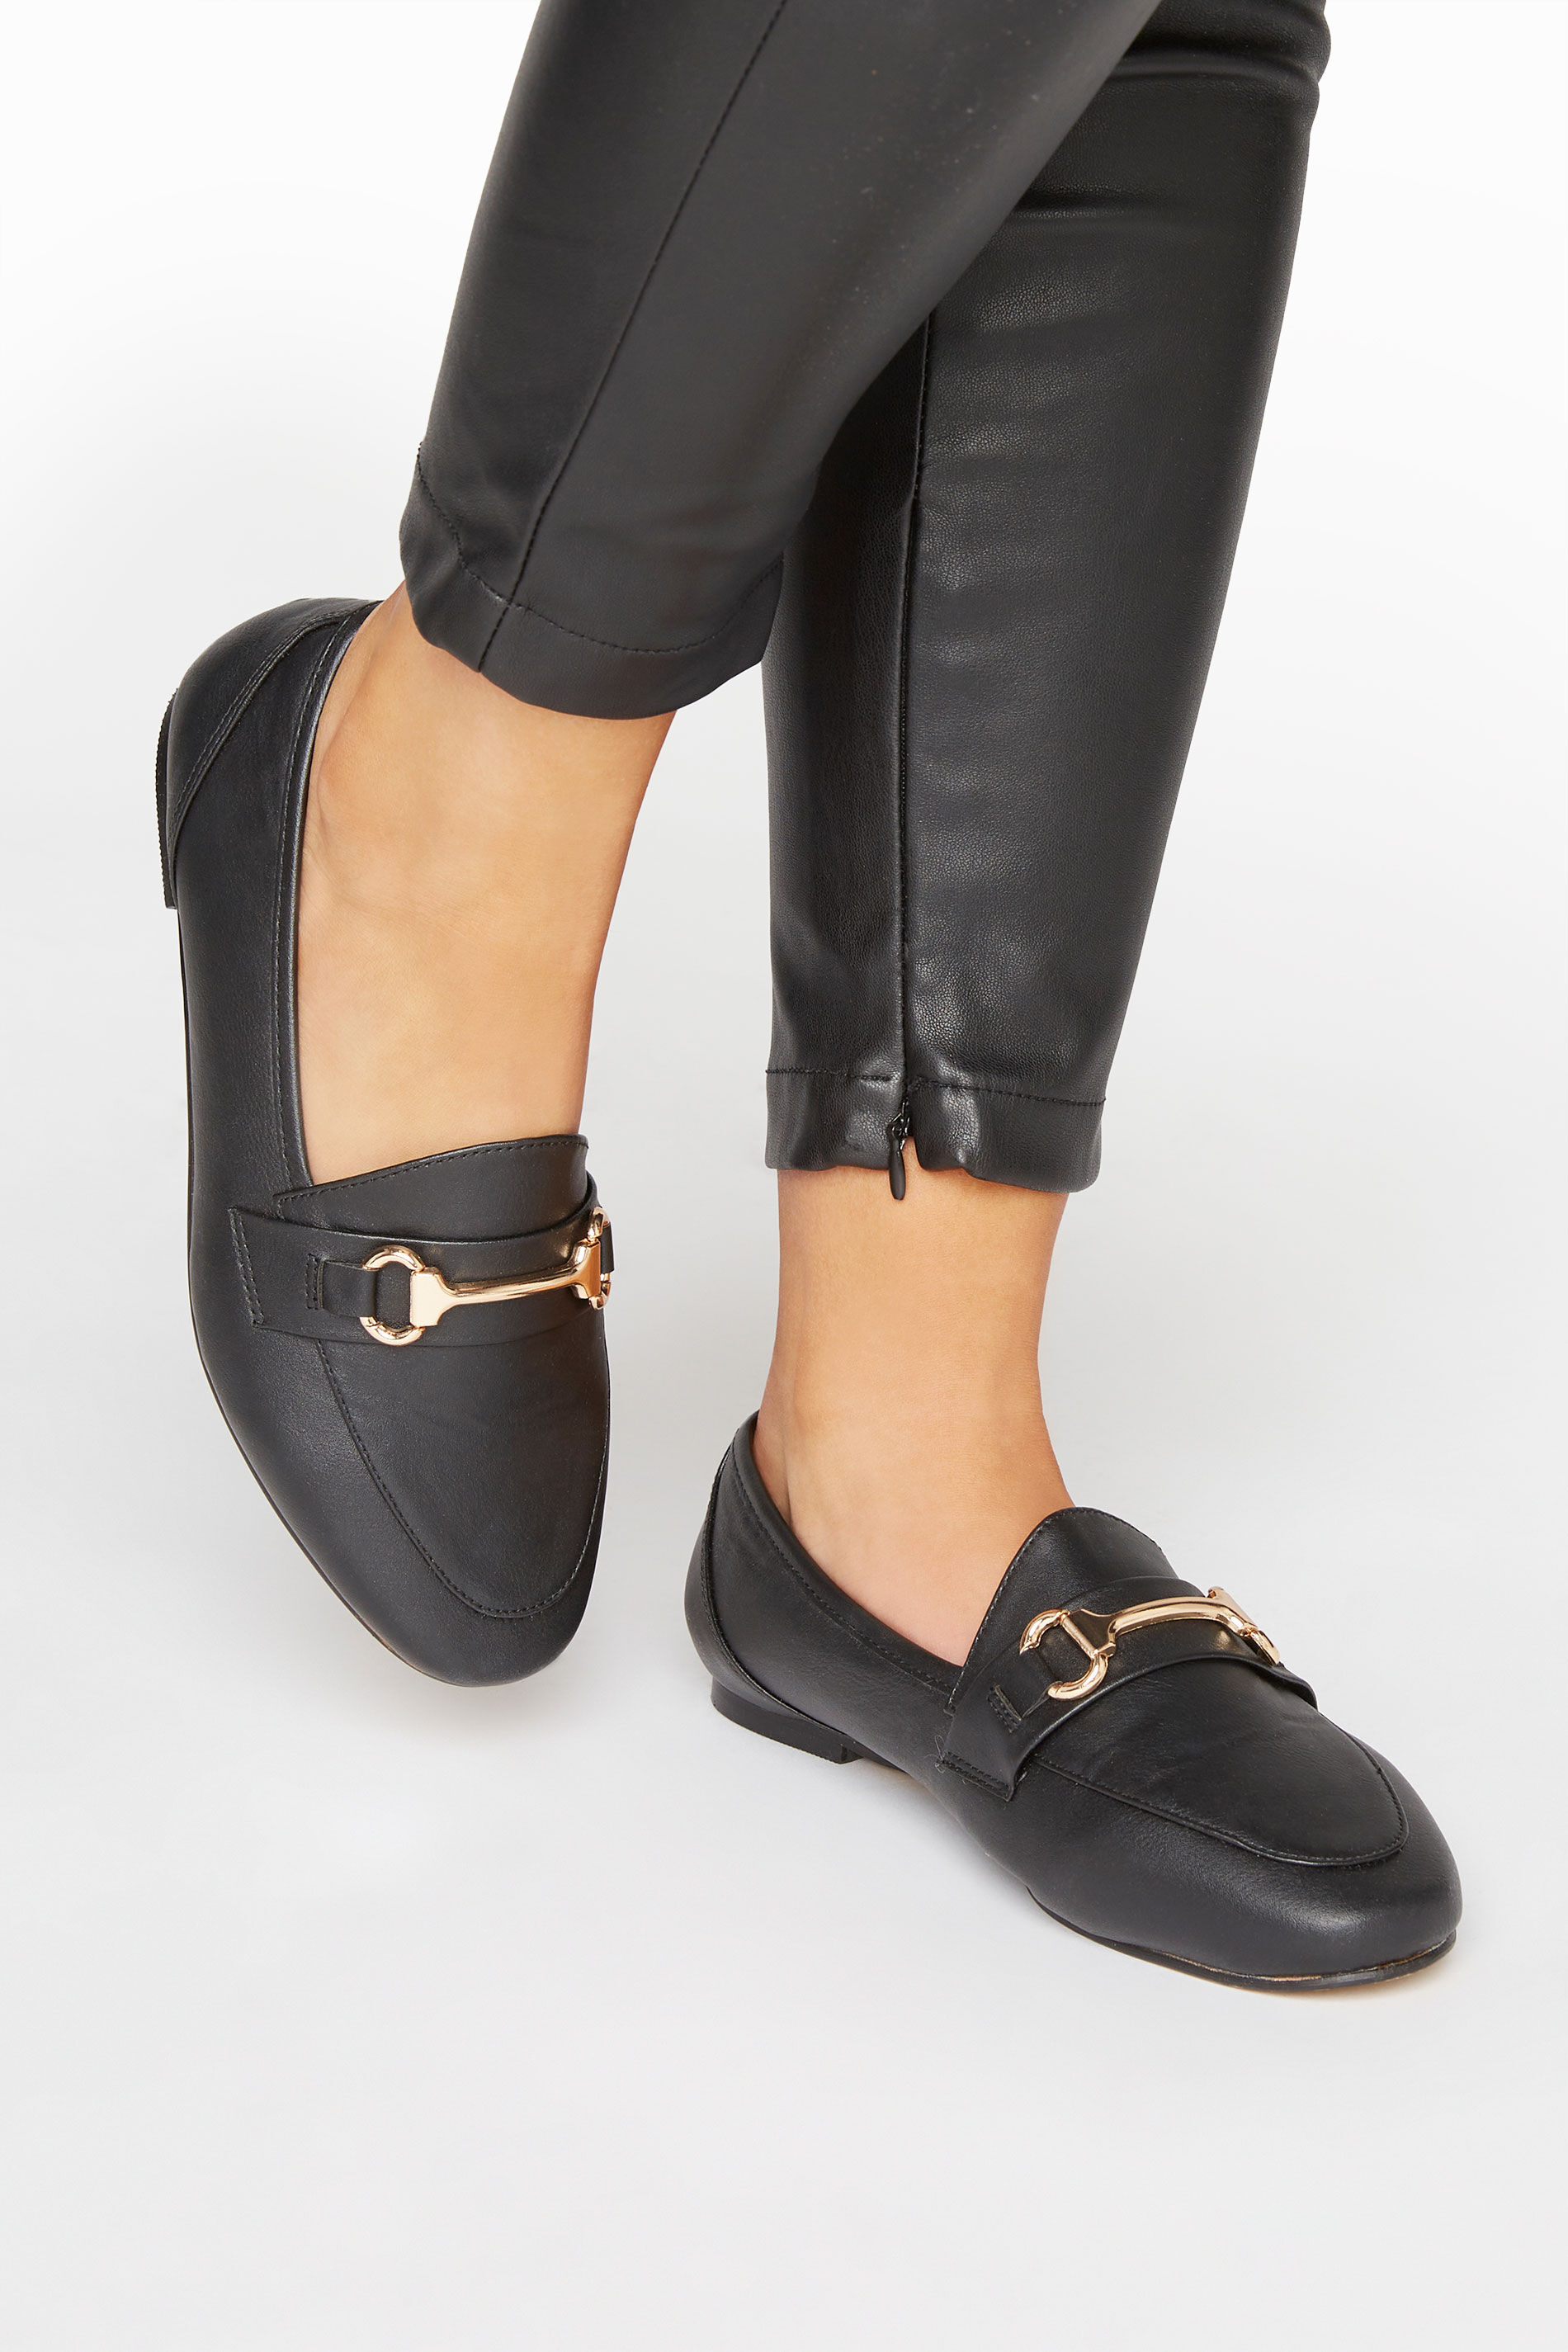 Yours Clothing Black metal trim loafer in extra wide fit